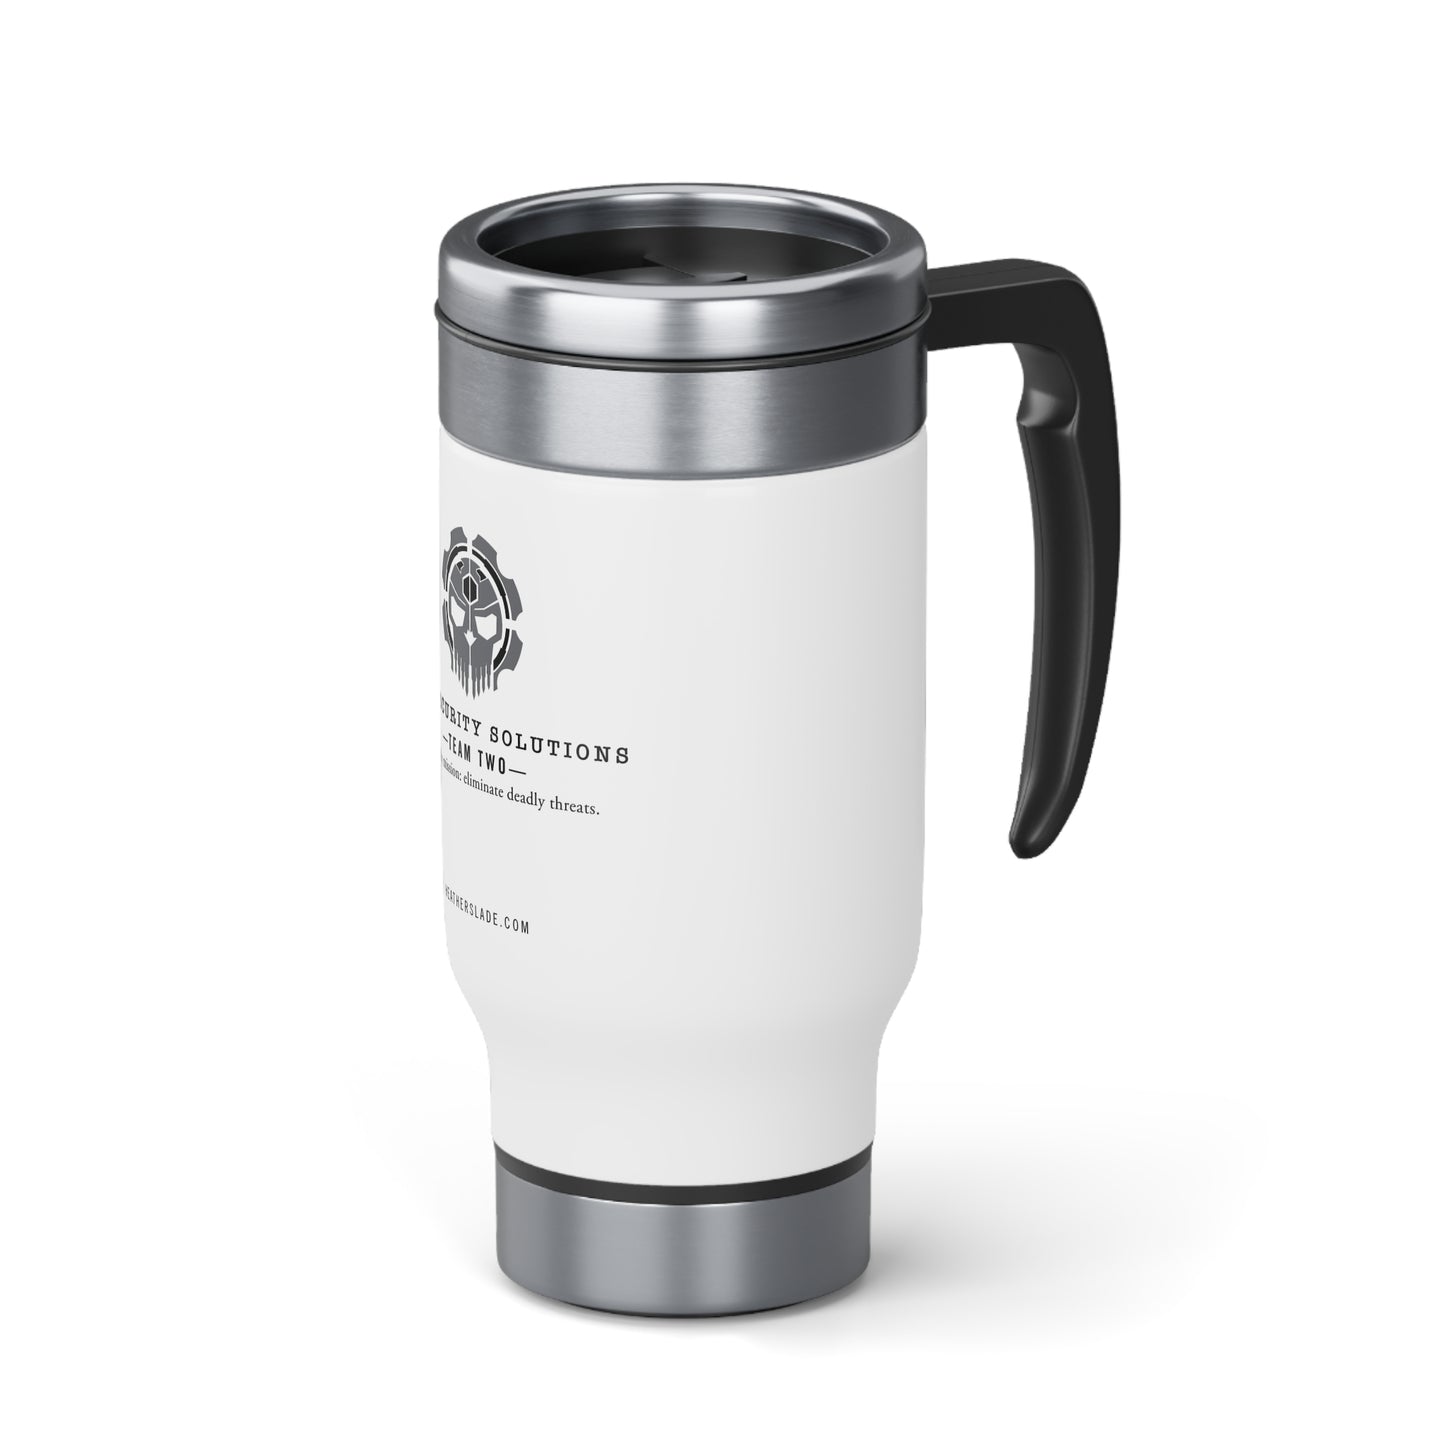 K19 Security Solutions Team Two Stainless Steel Travel Mug with Handle, 14oz